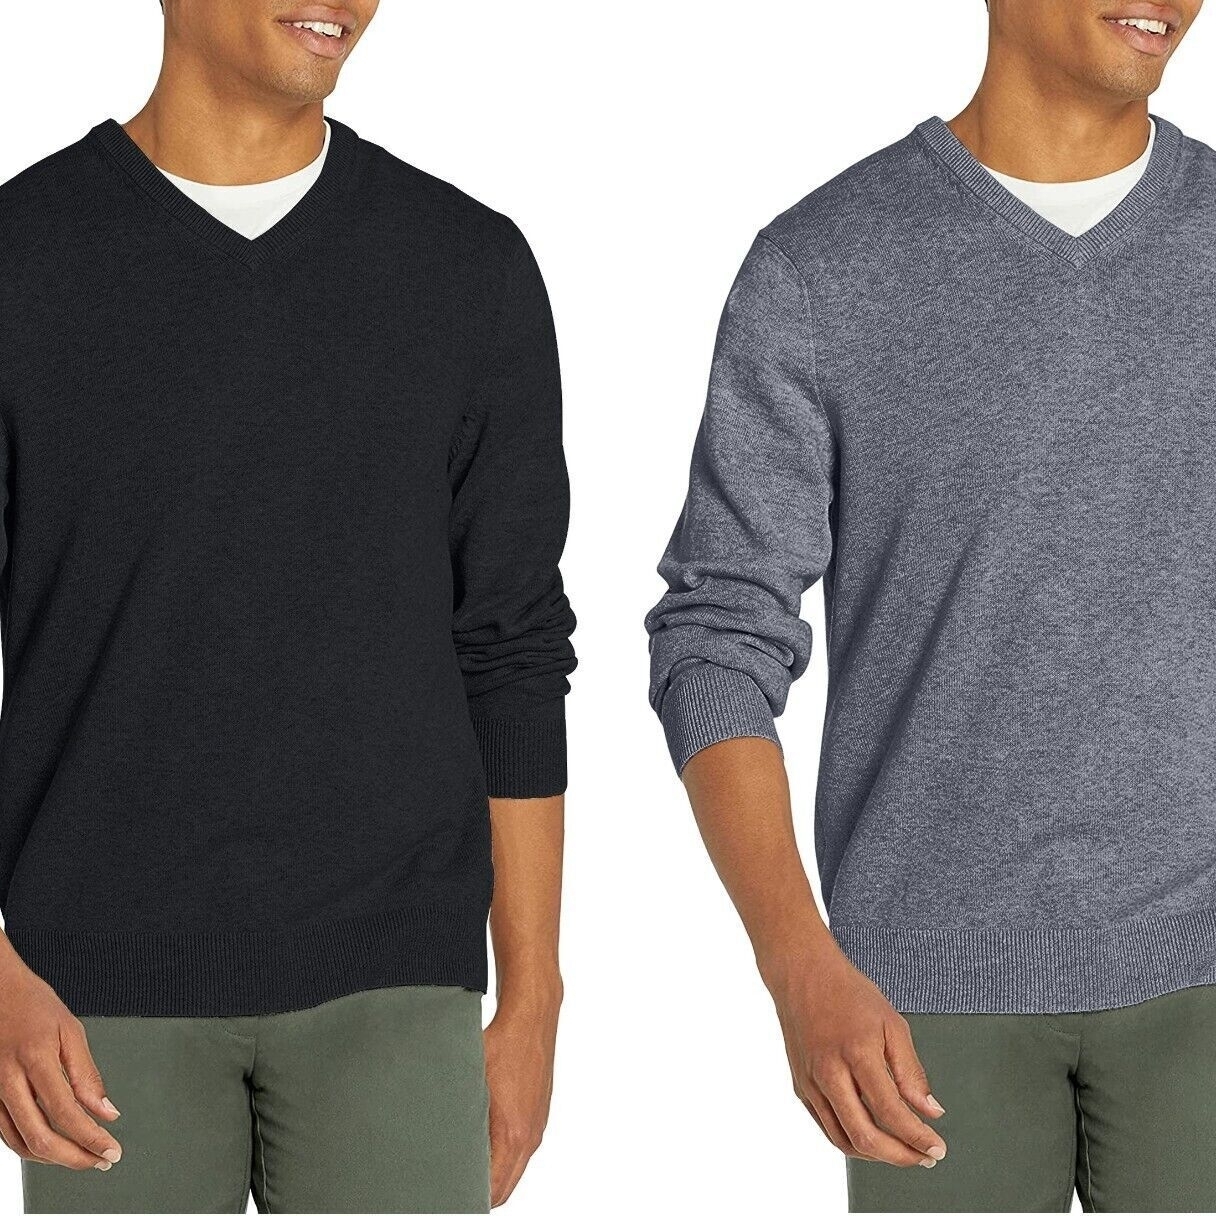 2-Pack Men's Casual Cozy Ultra Soft Slim Fit Warm Knit Pullover V-Neck Sweater - Black&Grey, X-Large